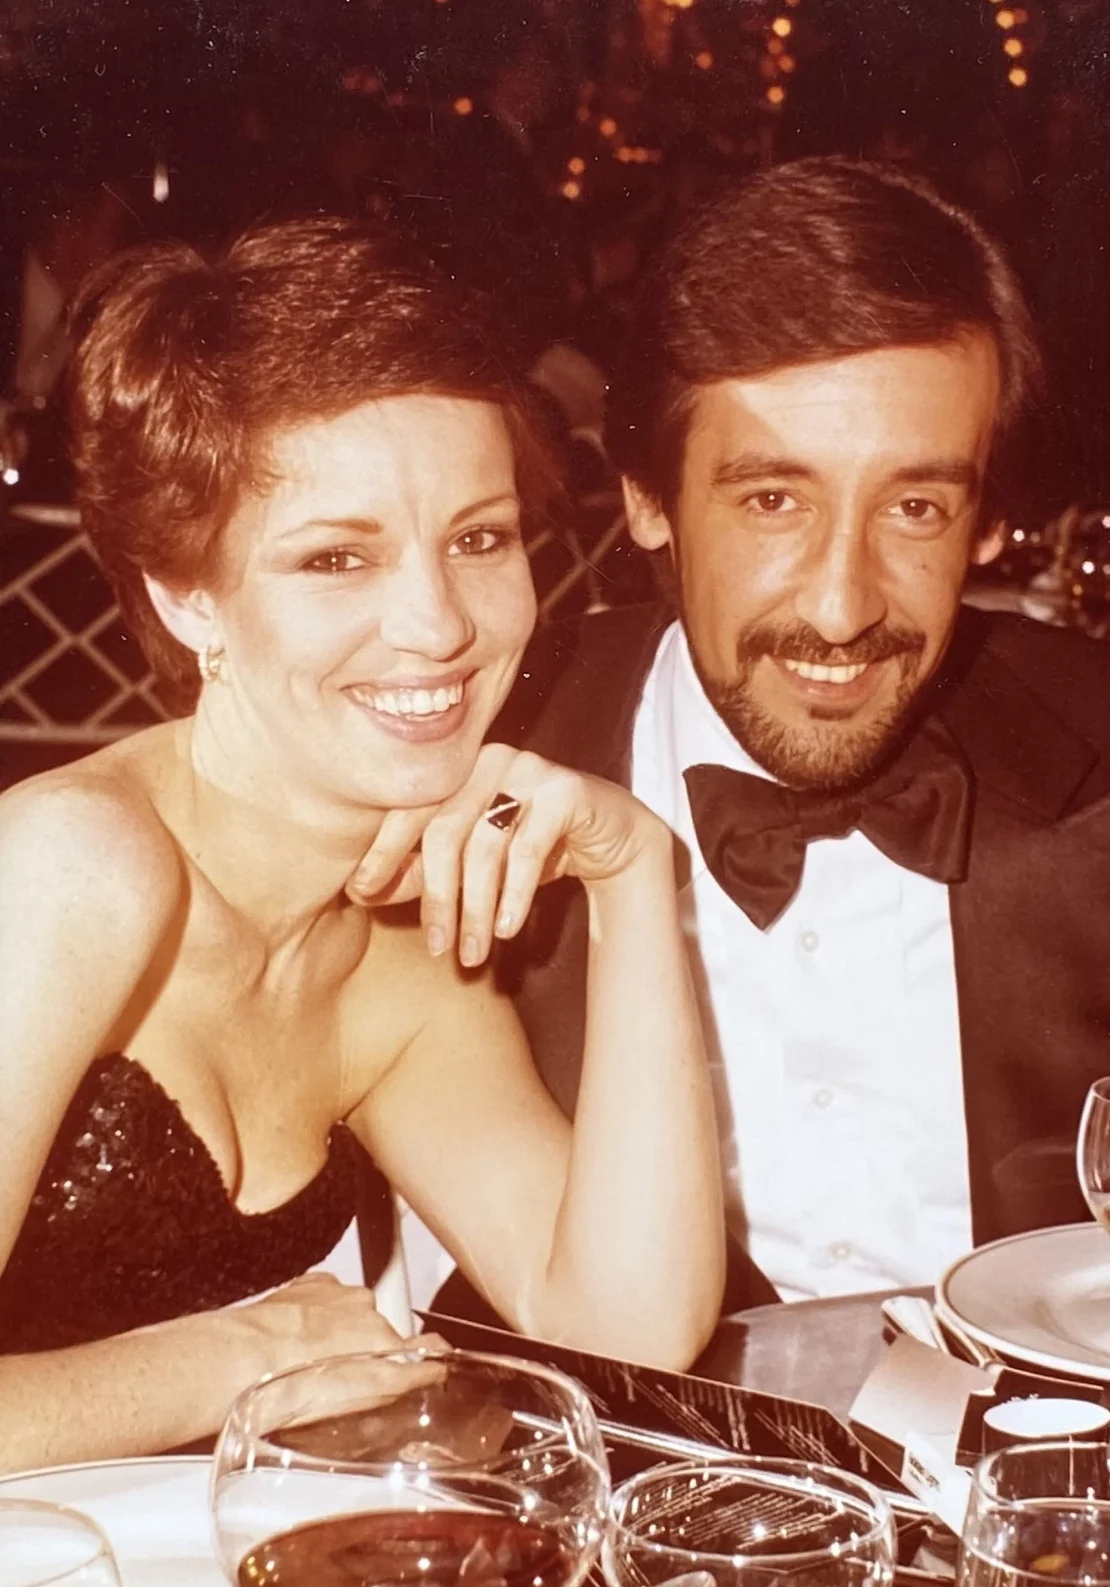 sally-and-stefano-1979-los-angeles